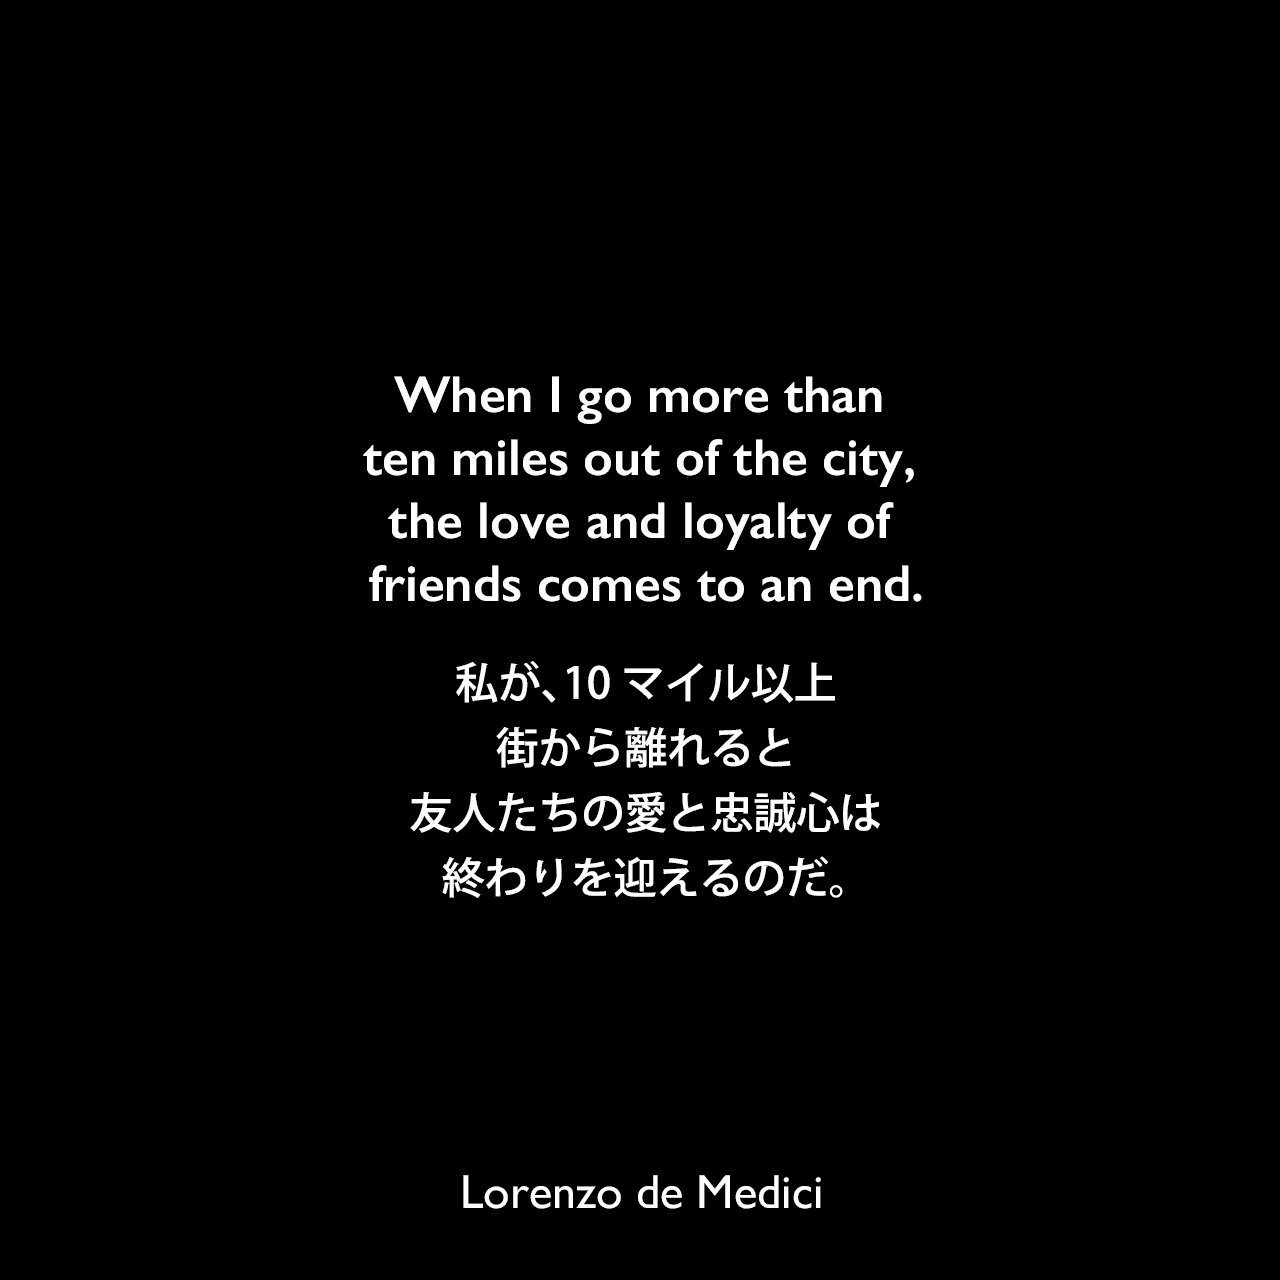 When I go more than ten miles out of the city, the love and loyalty of friends comes to an end.私が、10マイル以上街から離れると、友人たちの愛と忠誠心は終わりを迎えるのだ。Lorenzo de Medici